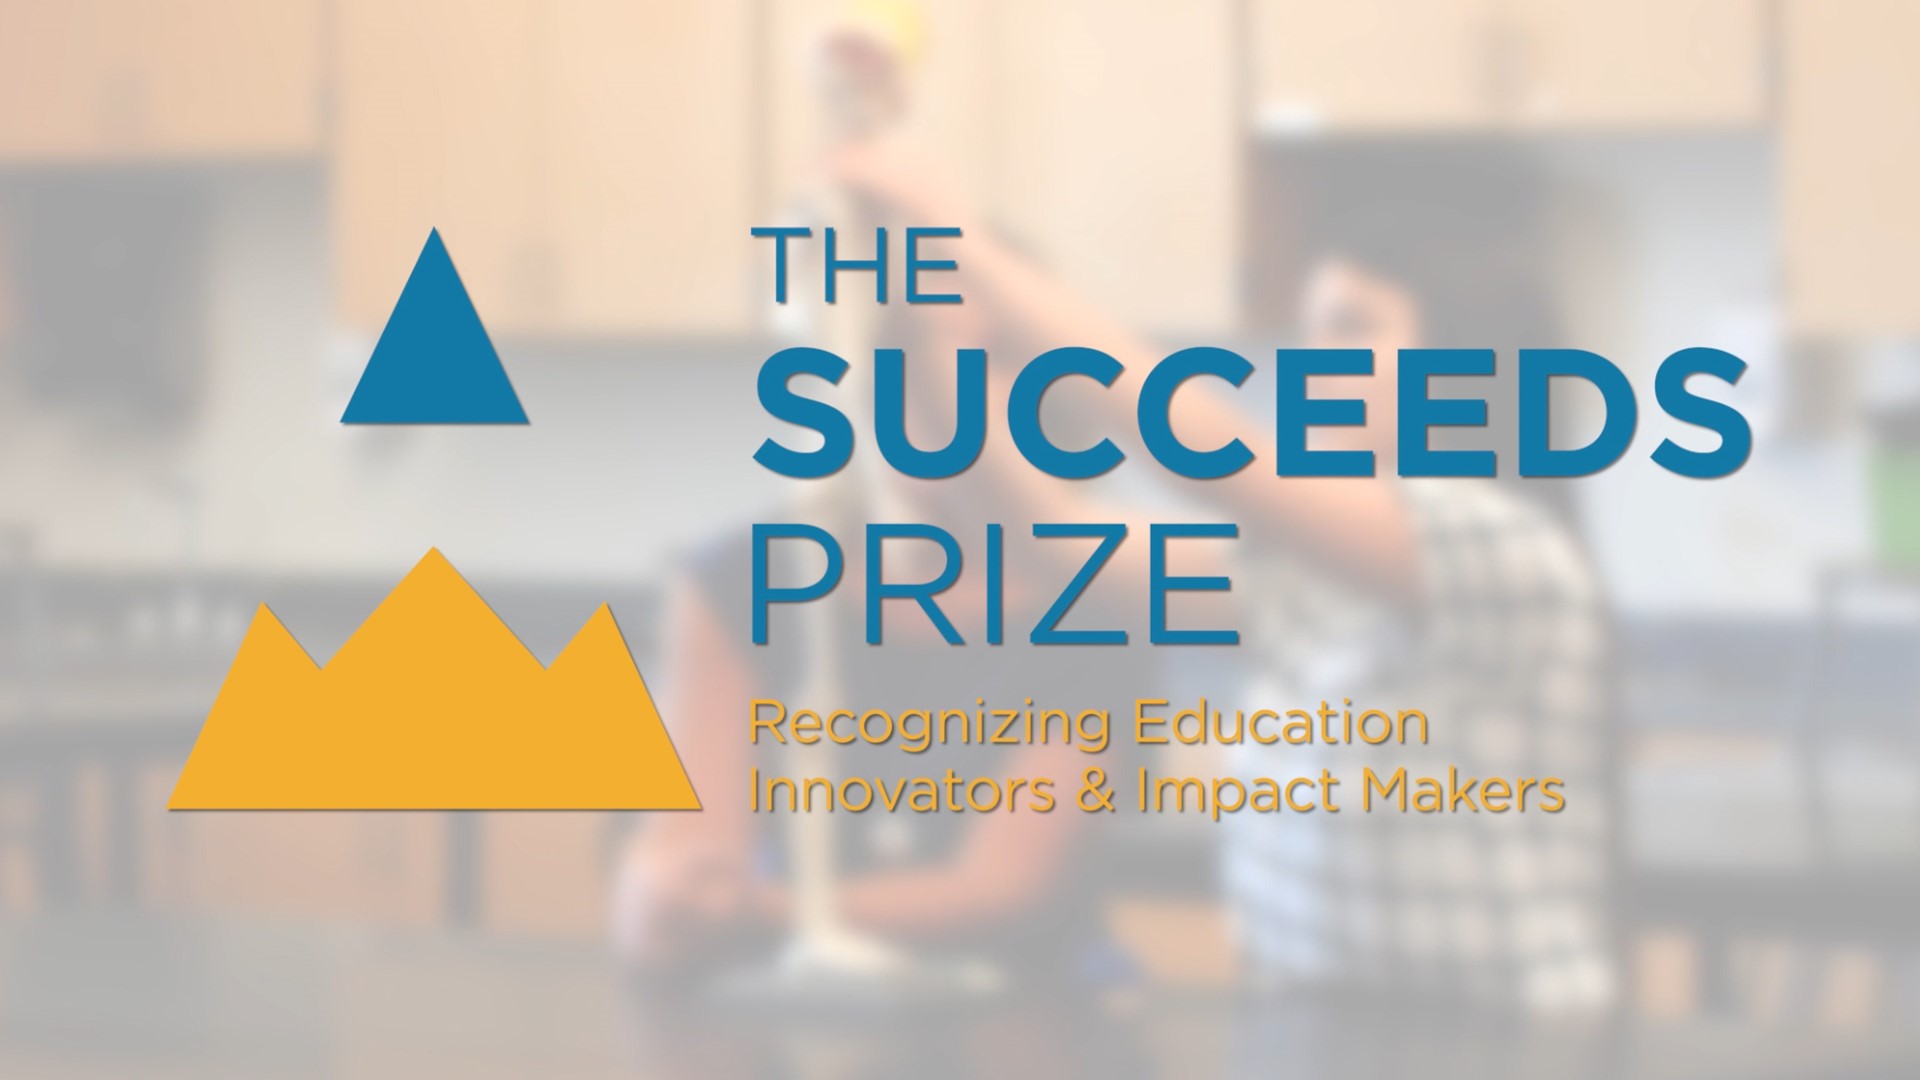 Colorado Succeeds has announced the 2021 winners of the Succeeds Prize, an award recognizing education programs developing agile learners and systems.